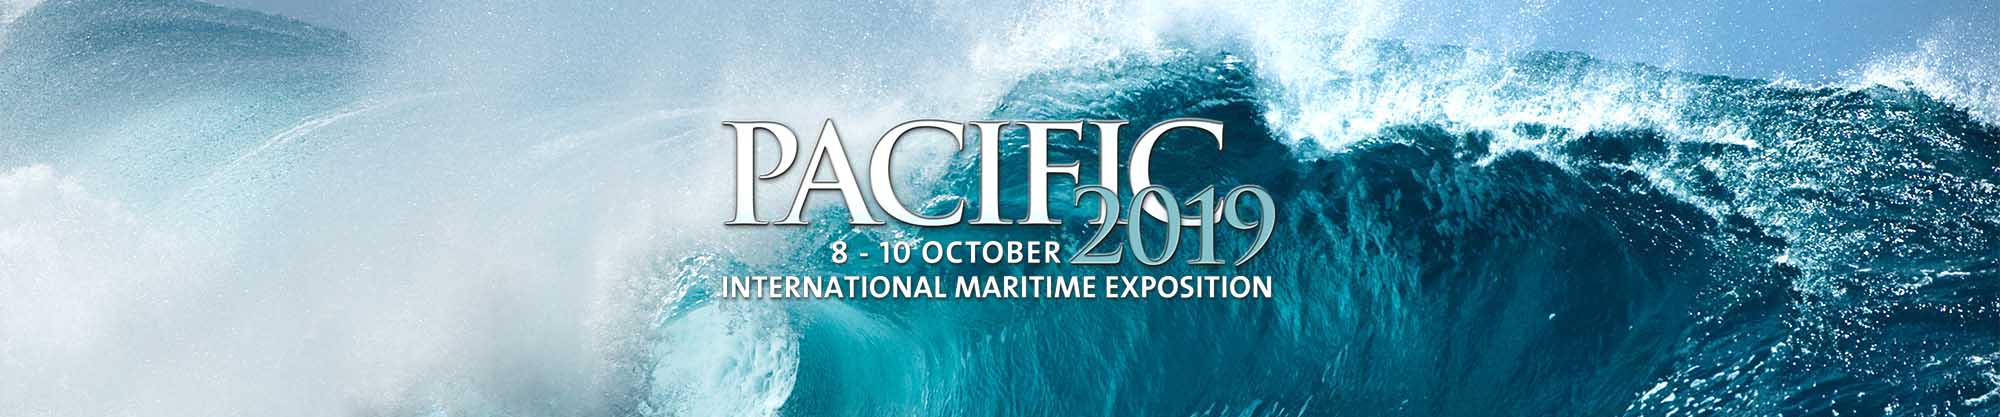 Pacific 2019 banner